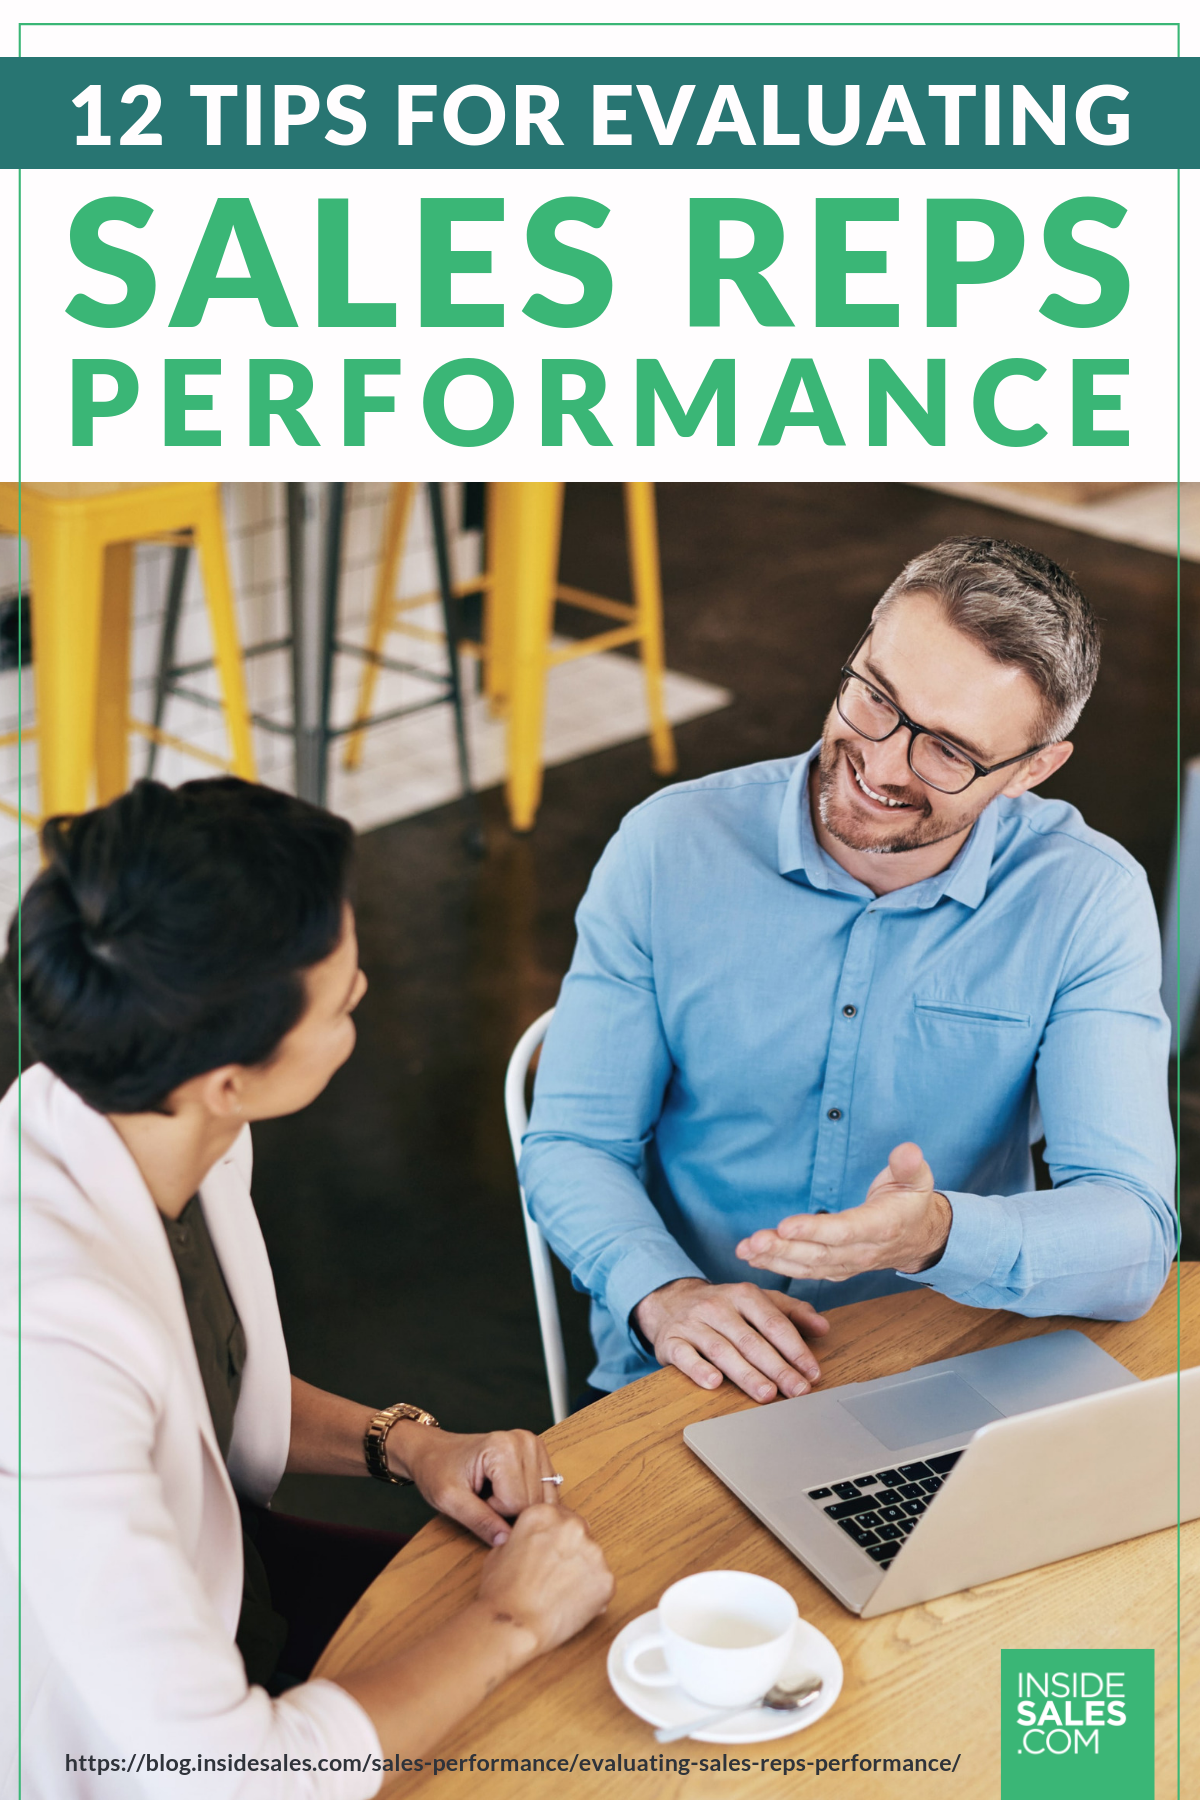 12 Tips For Evaluating Sales Reps Performance https://www.insidesales.com/blog/sales-performance/evaluating-sales-reps-performance/